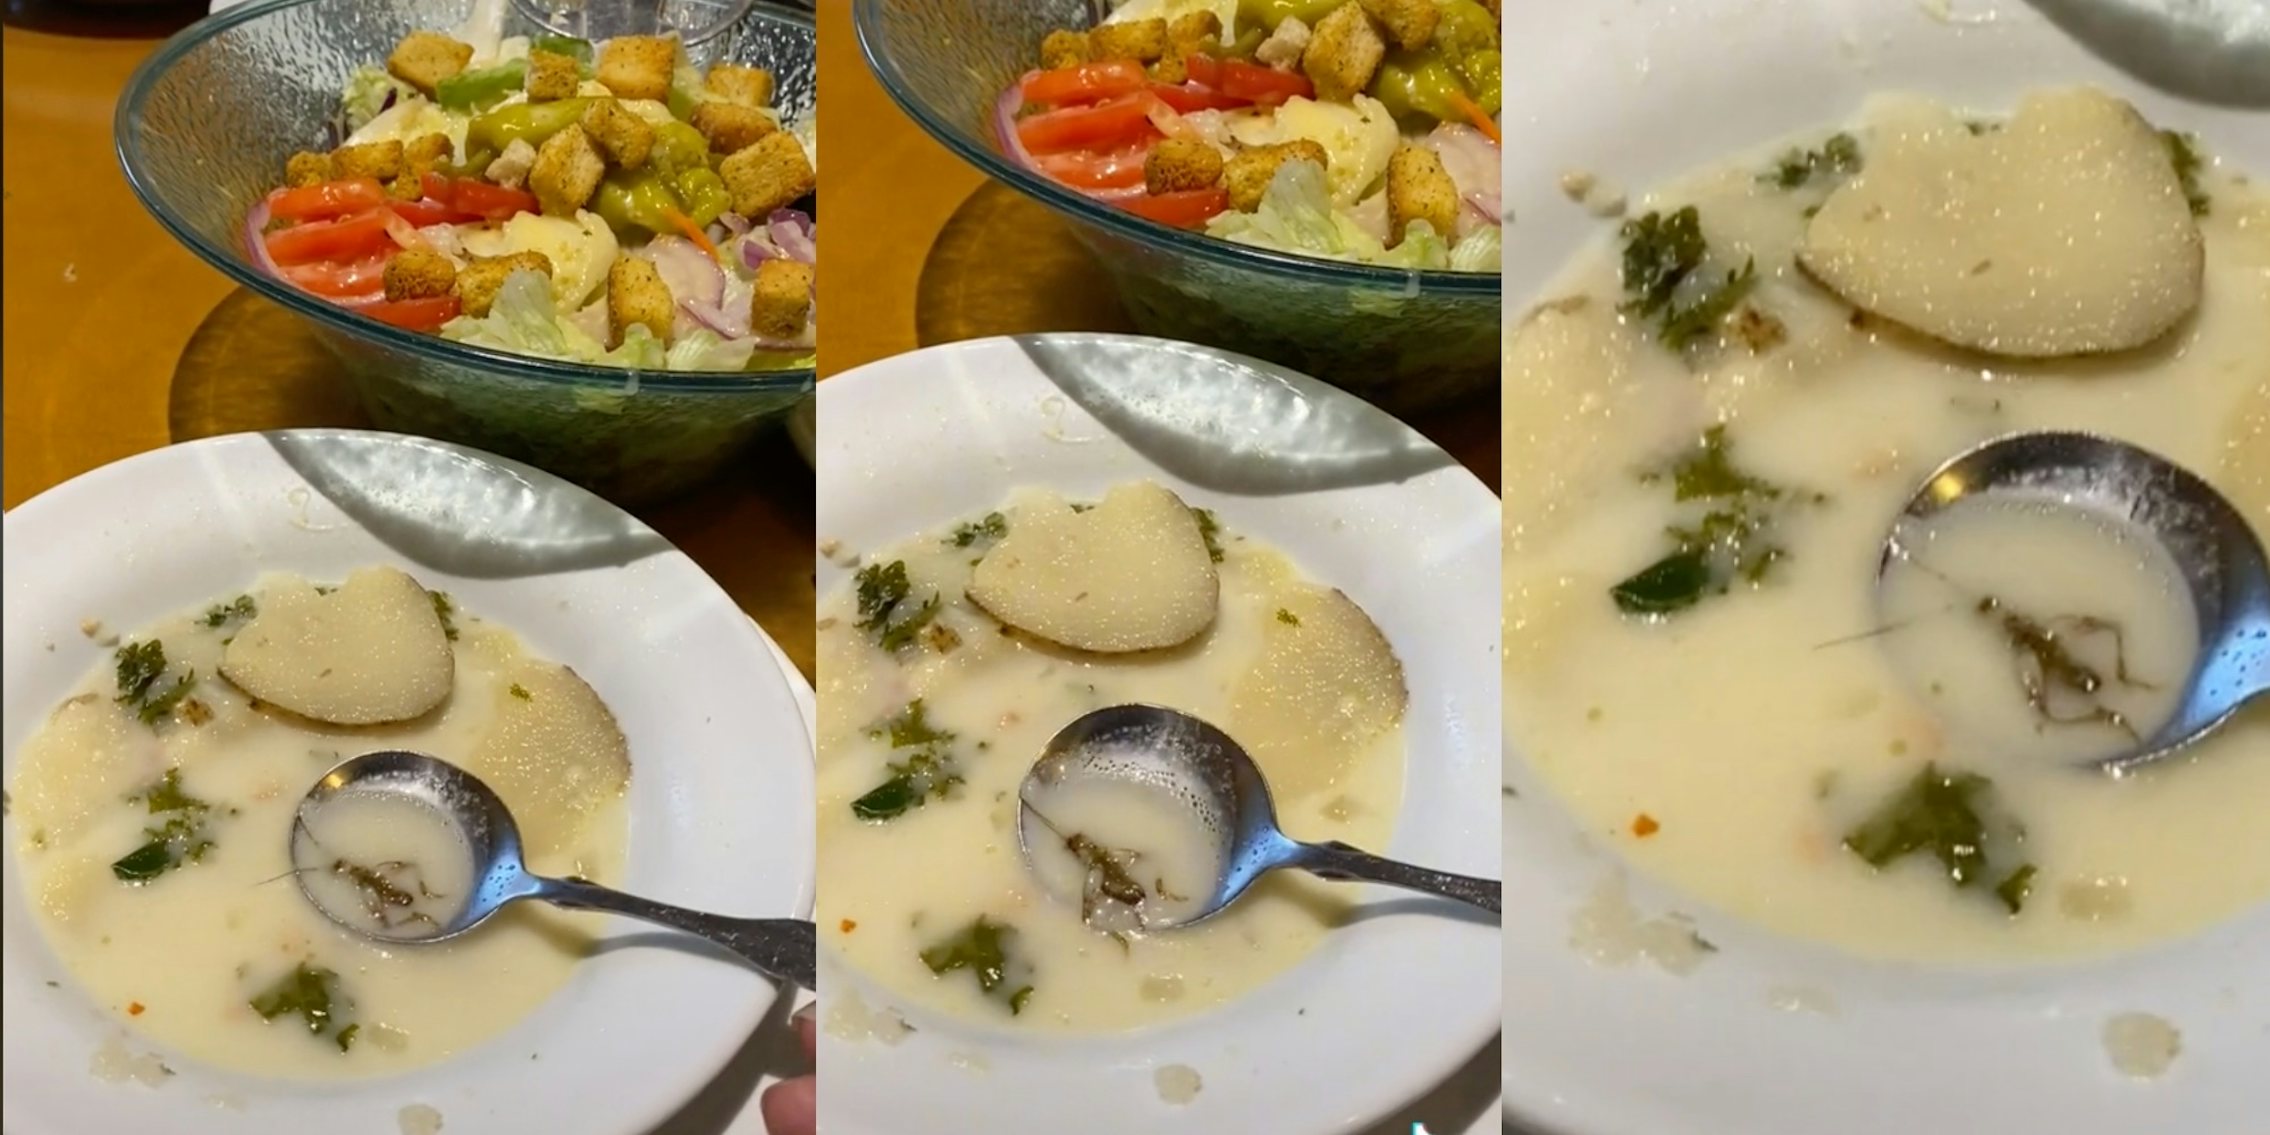 Olive Garden Will Allegedly Sell You “Anything That's Not Nailed Down to  Wall”